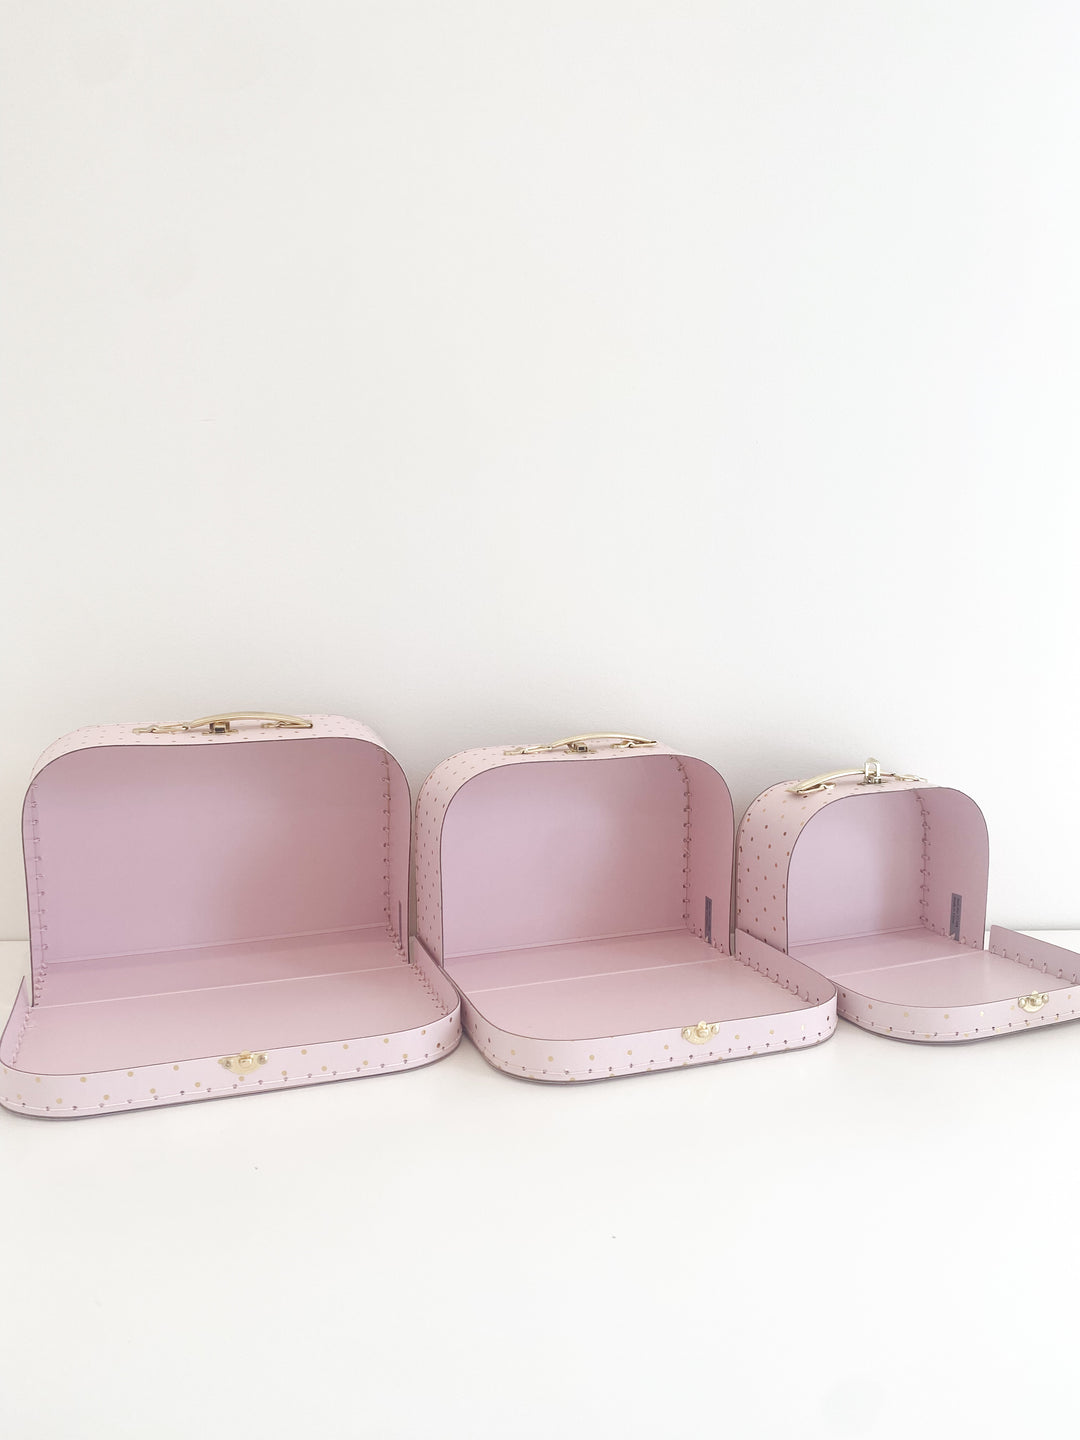 Large Suitcase Traveling Dollhouse Room | Pink Polka Dots